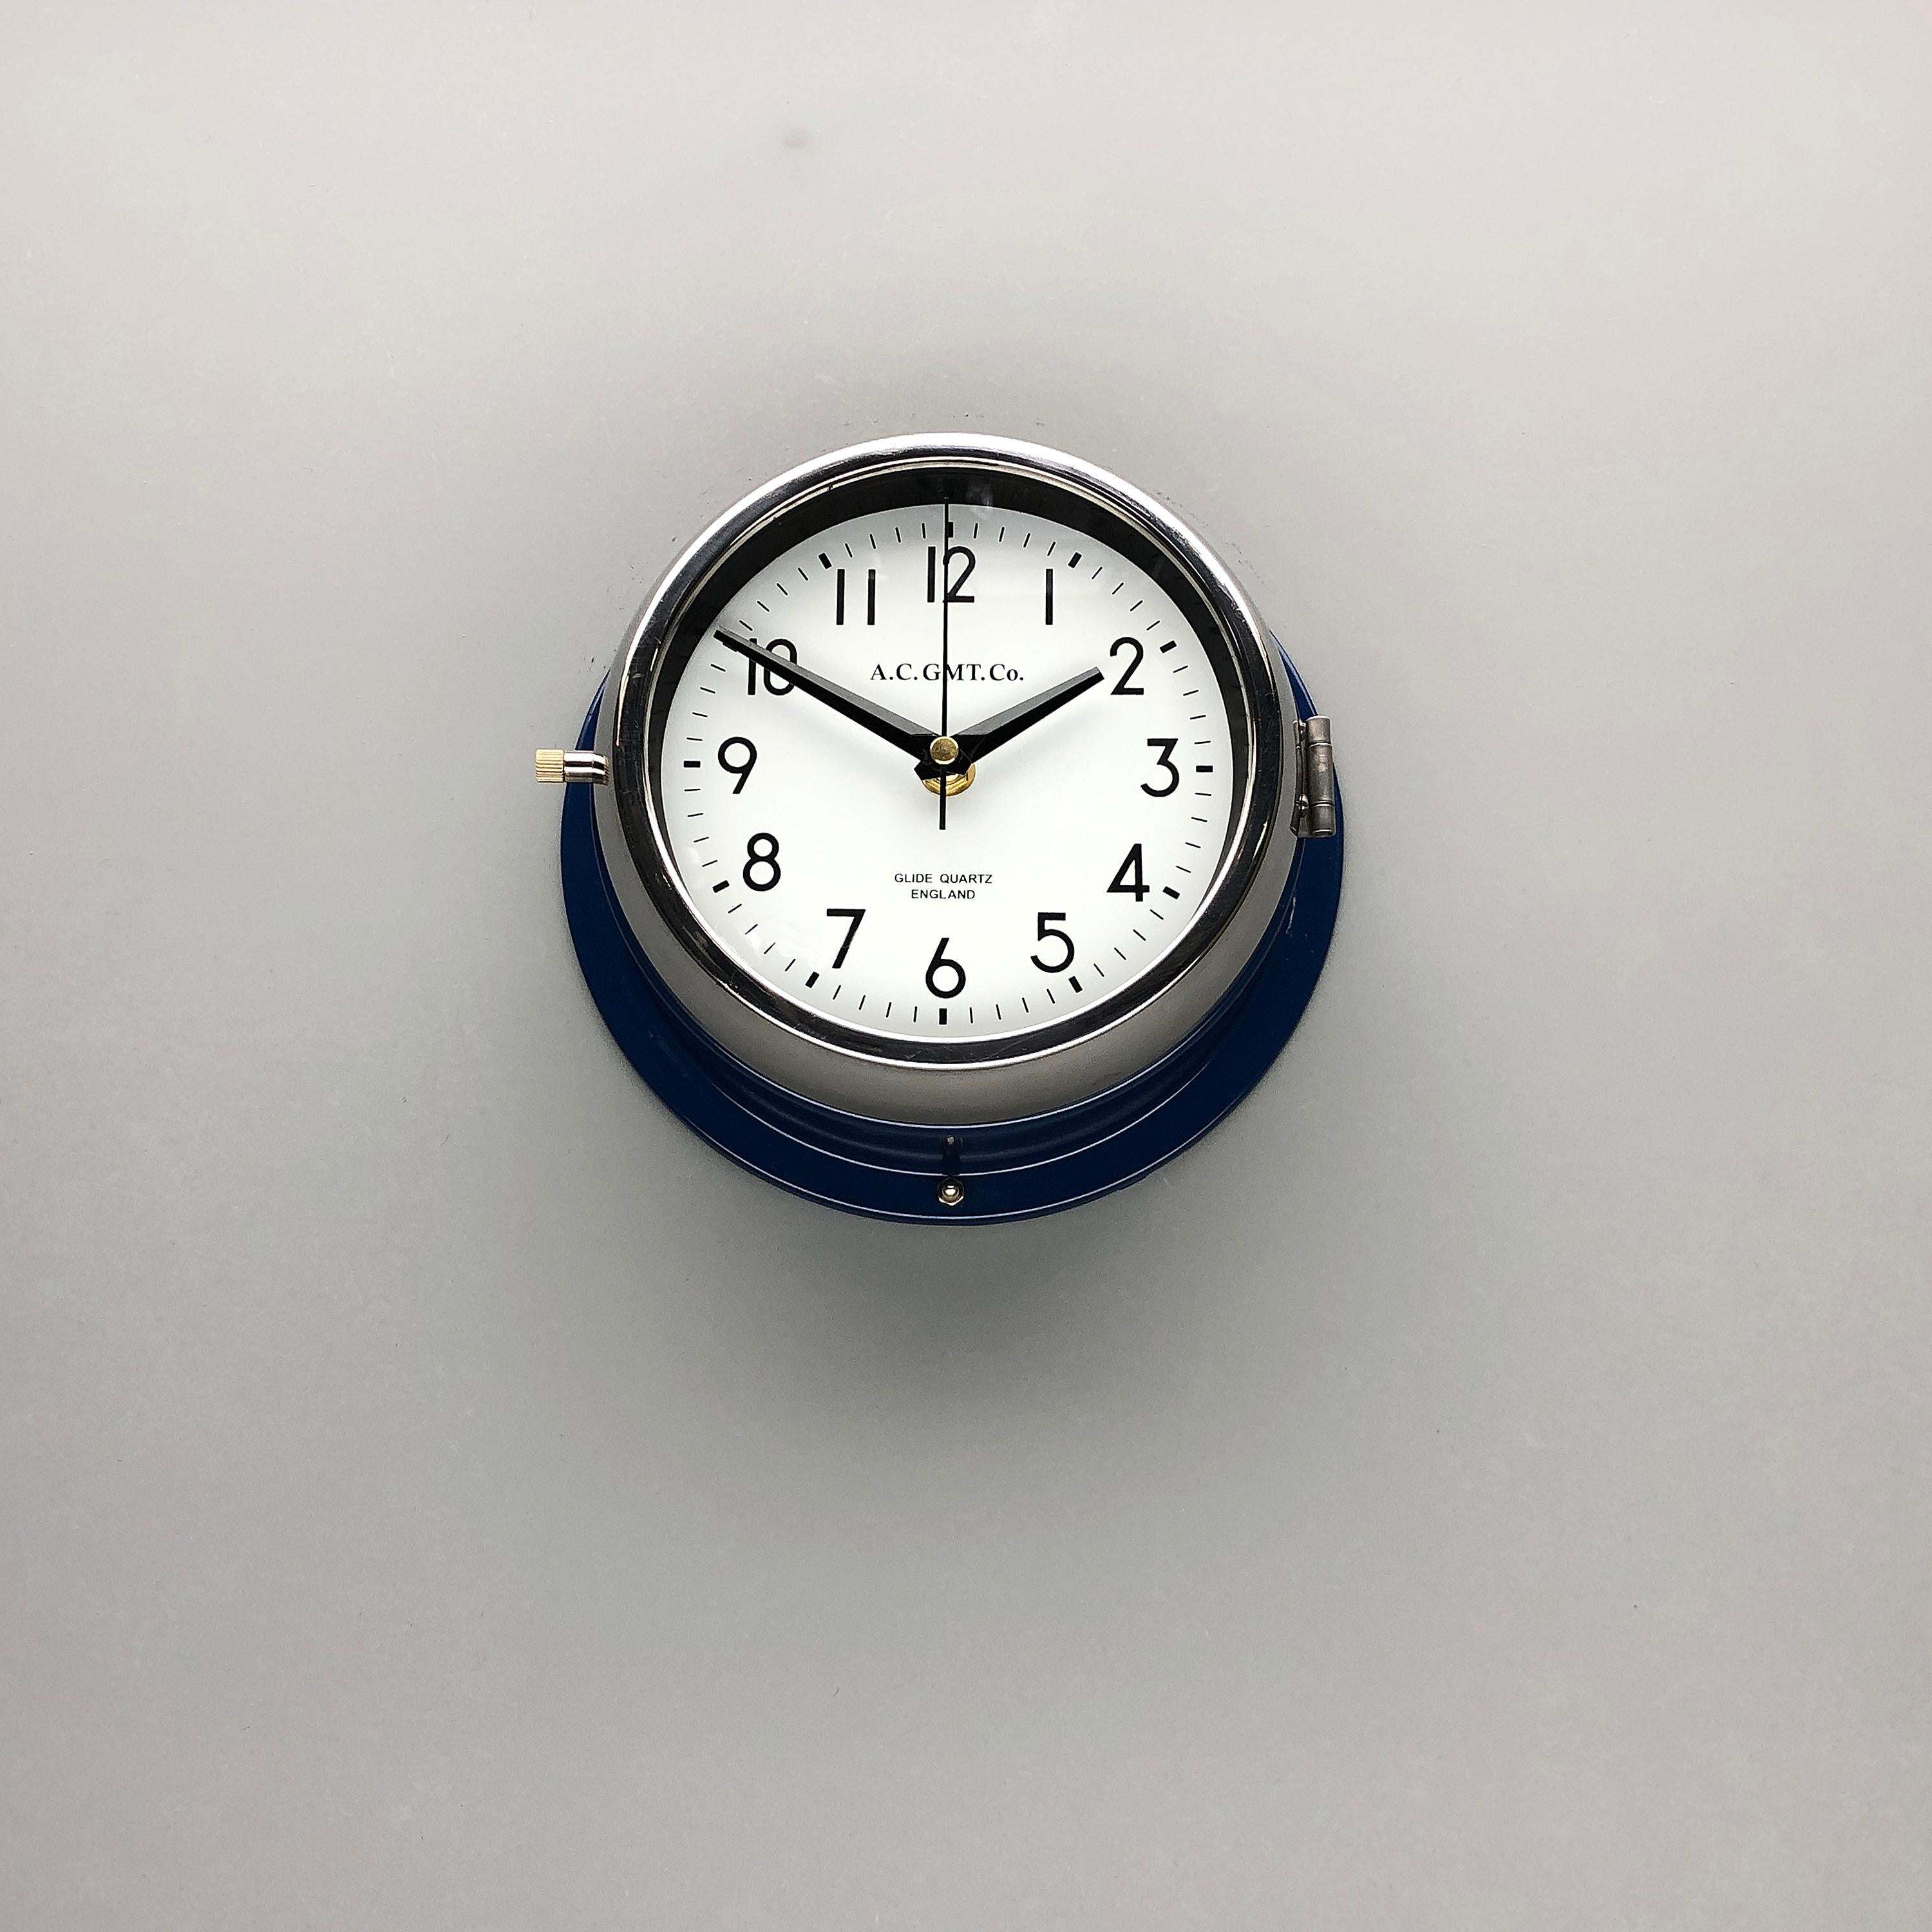 Glazed 1970s British Classic Blue & Chrome AC GMT Co. Industrial Wall Clock White Dial